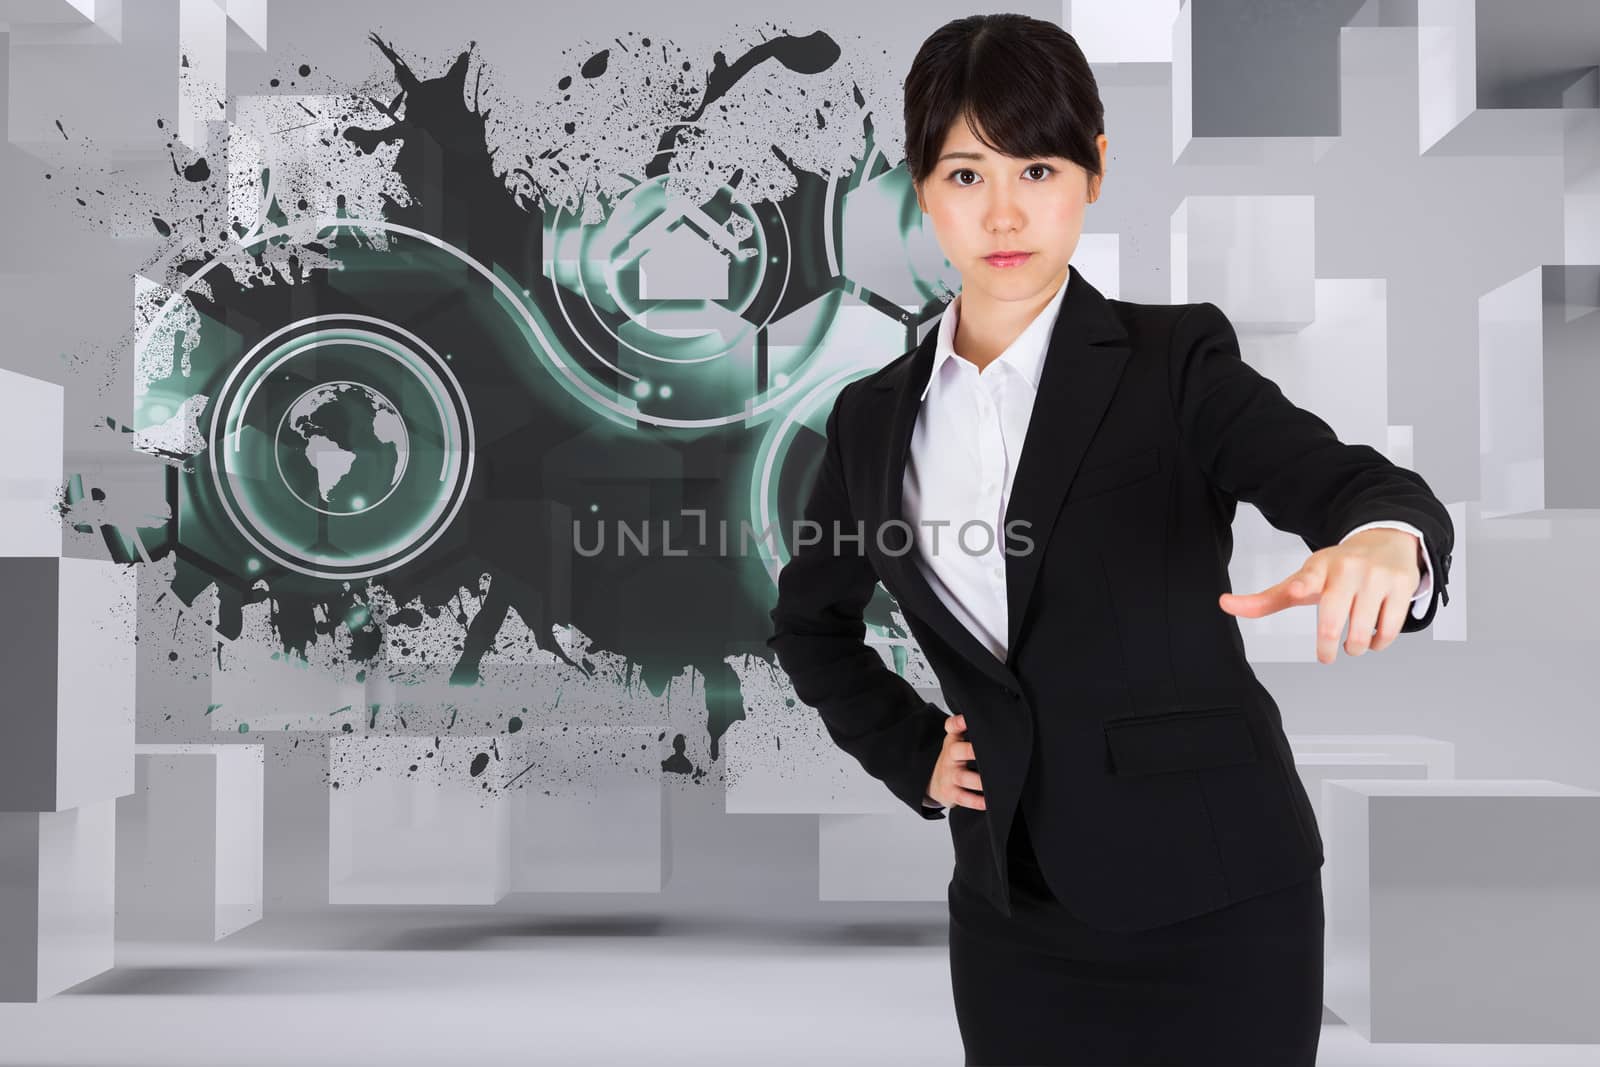 Focused businesswoman pointing against splash showing technology interface